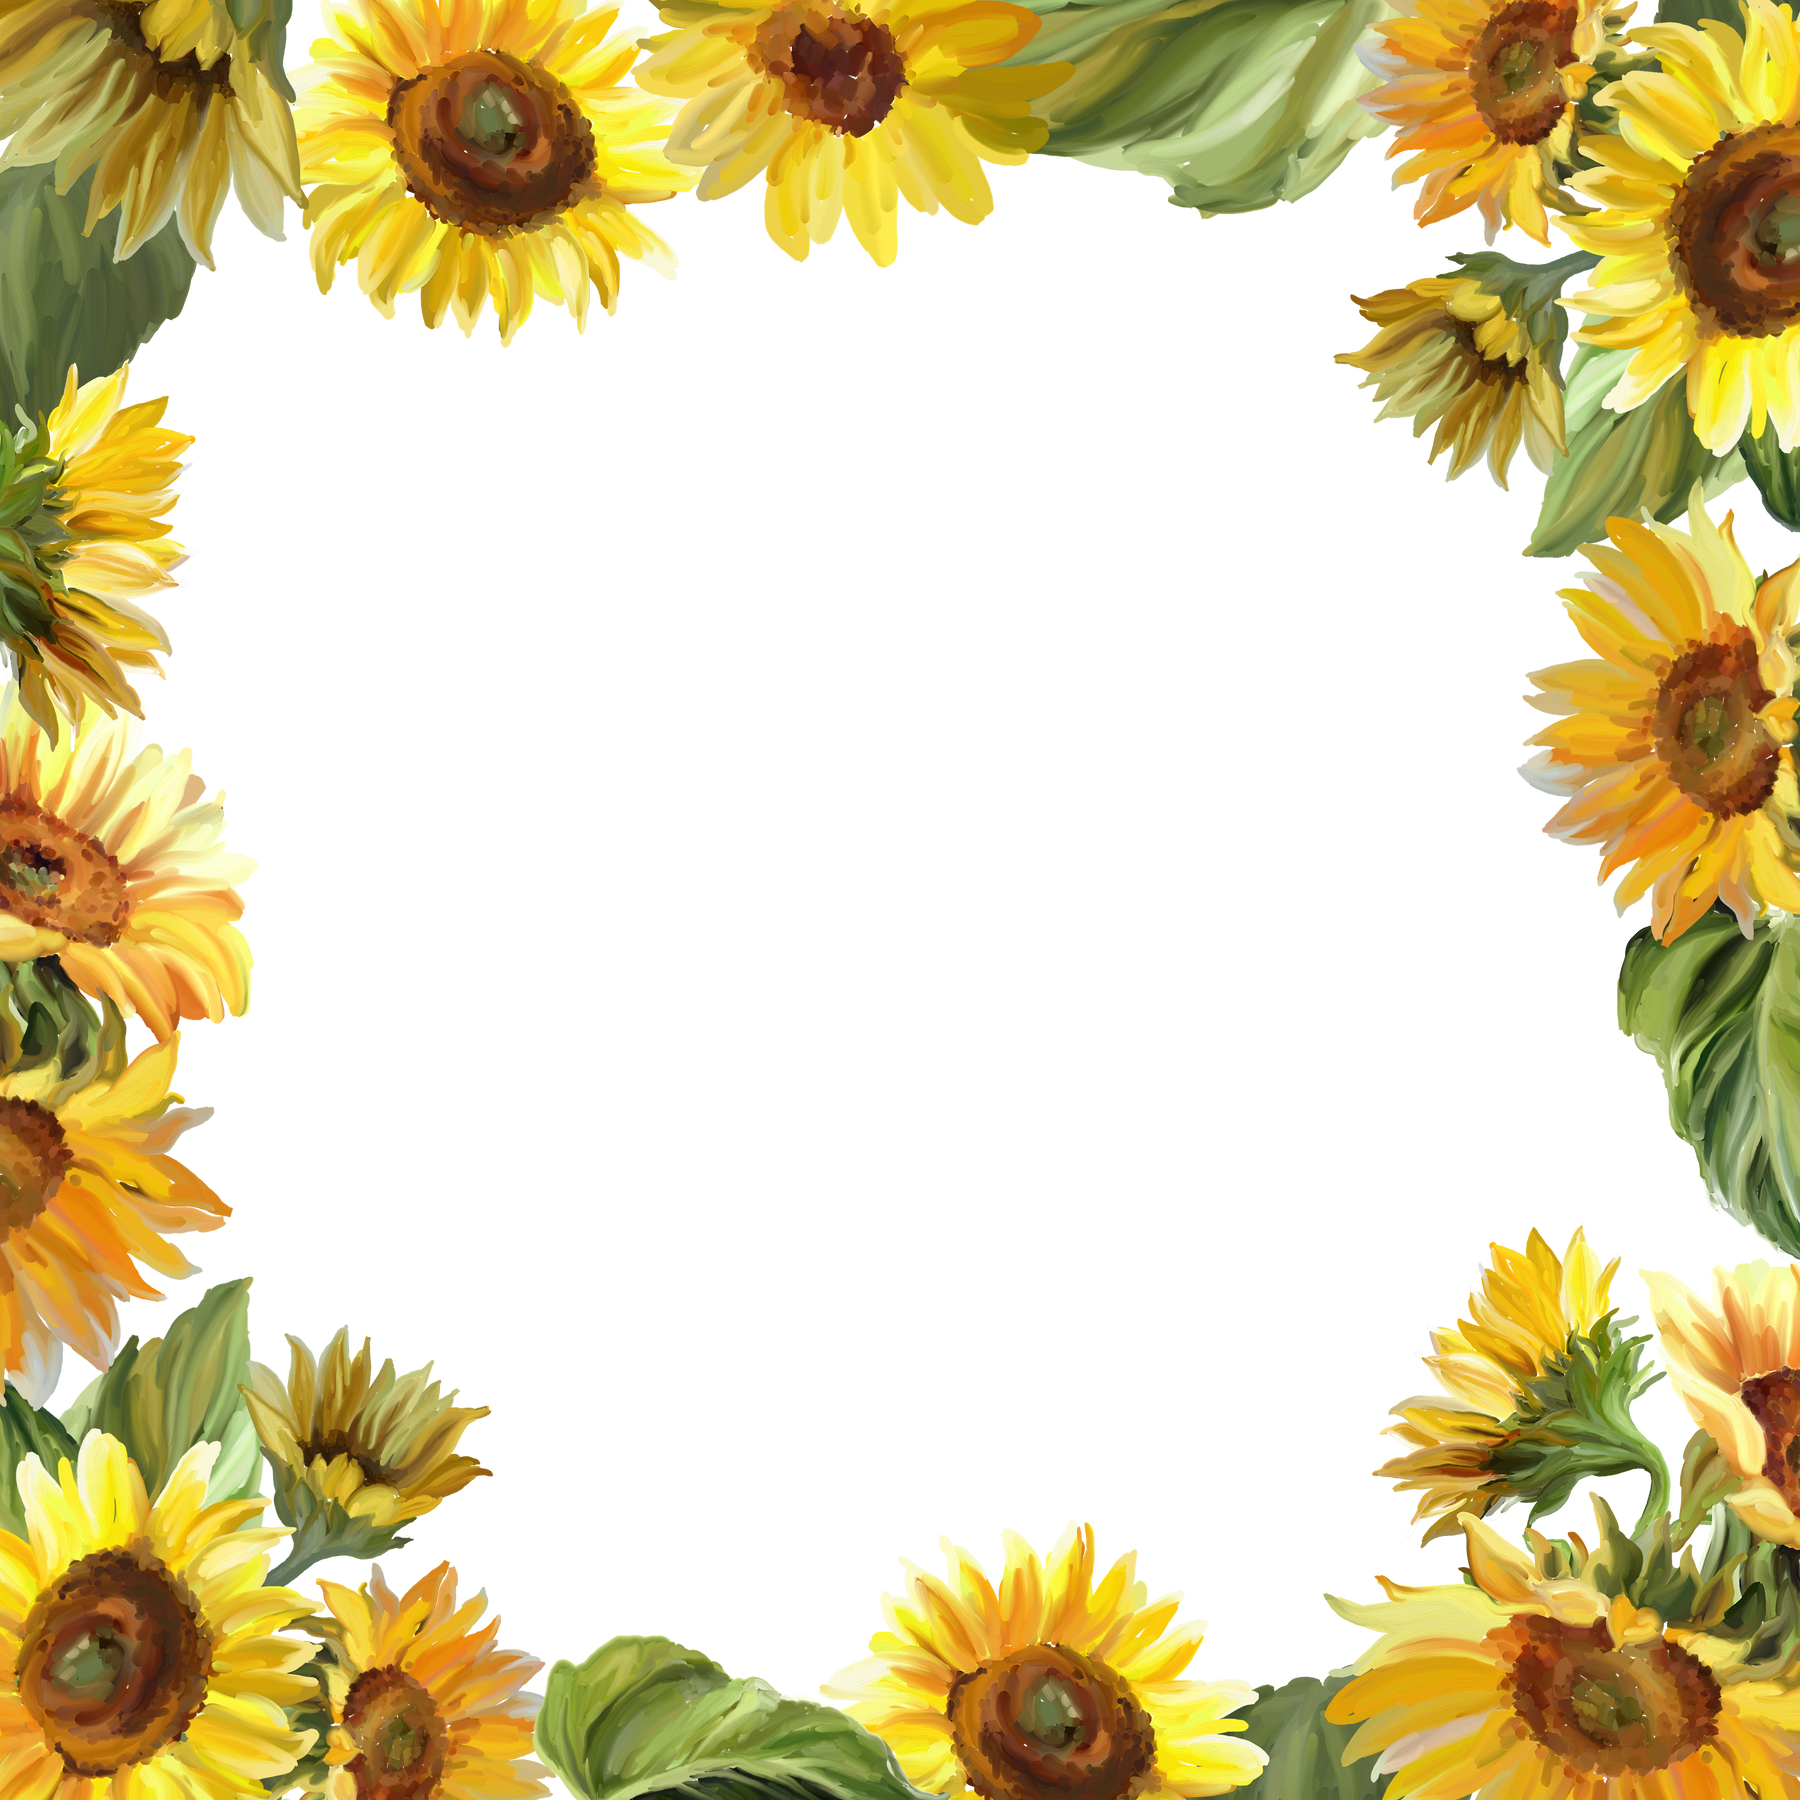 Frame with yellow sunflowers